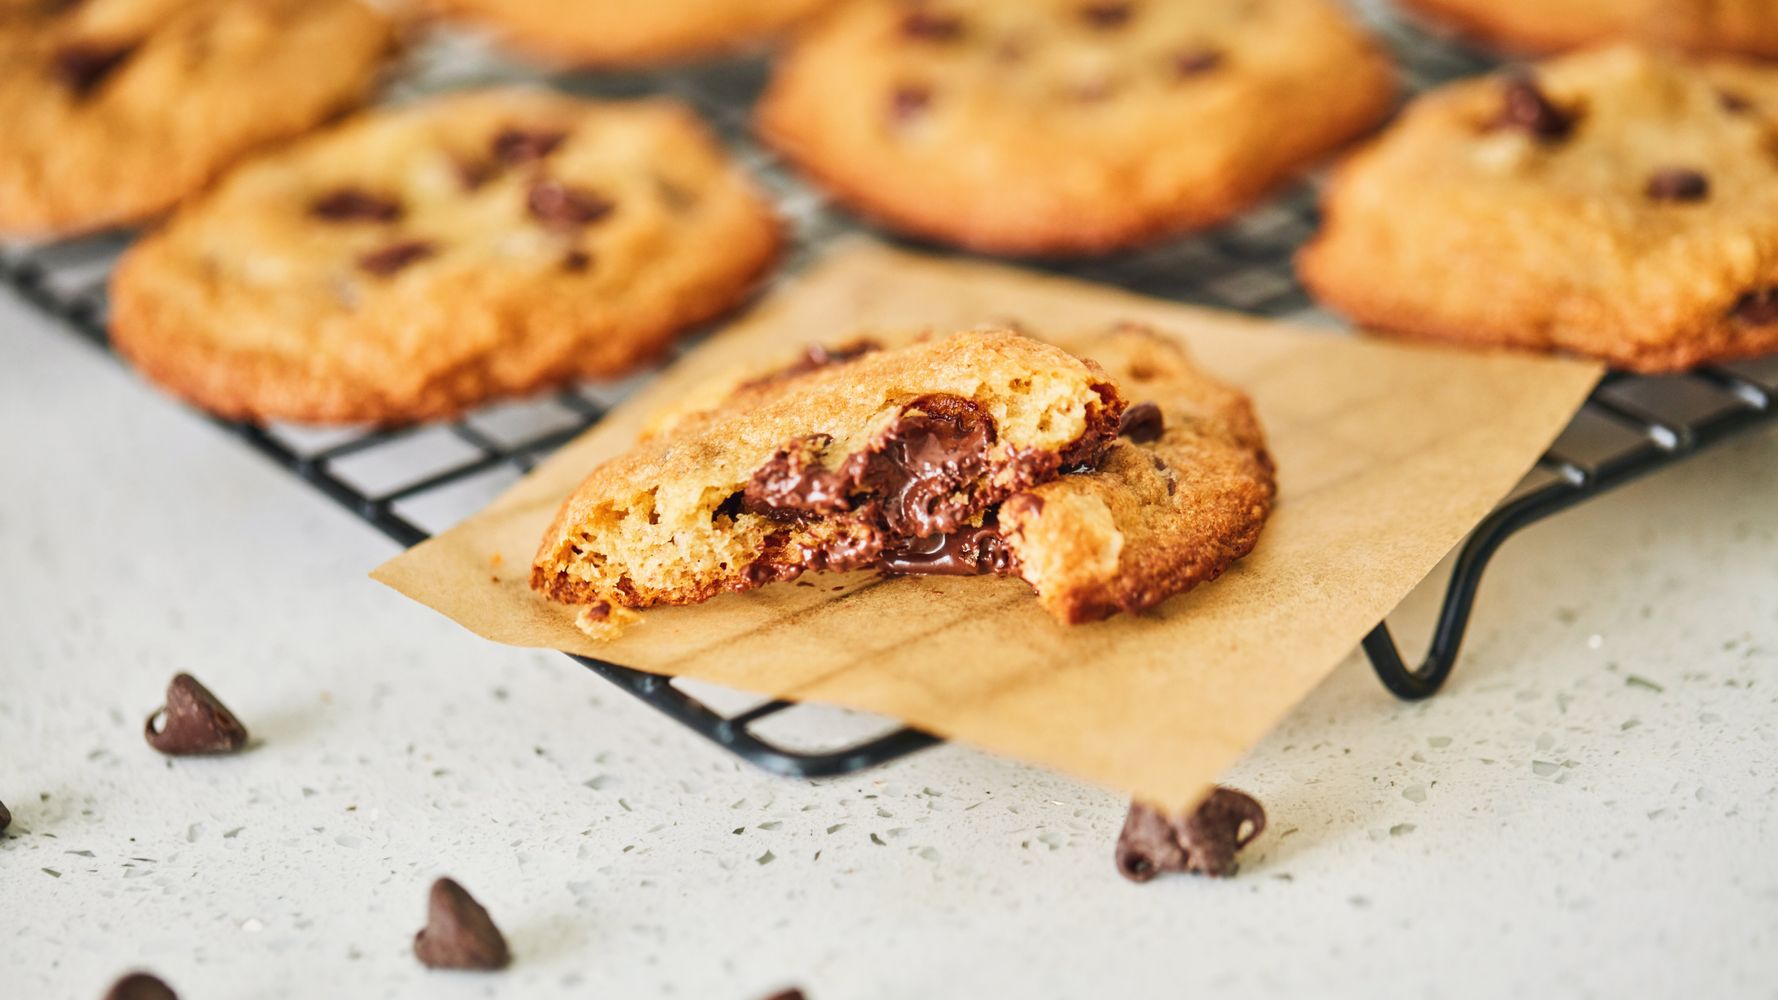 The Best Chocolate For Chocolate Chip Cookies